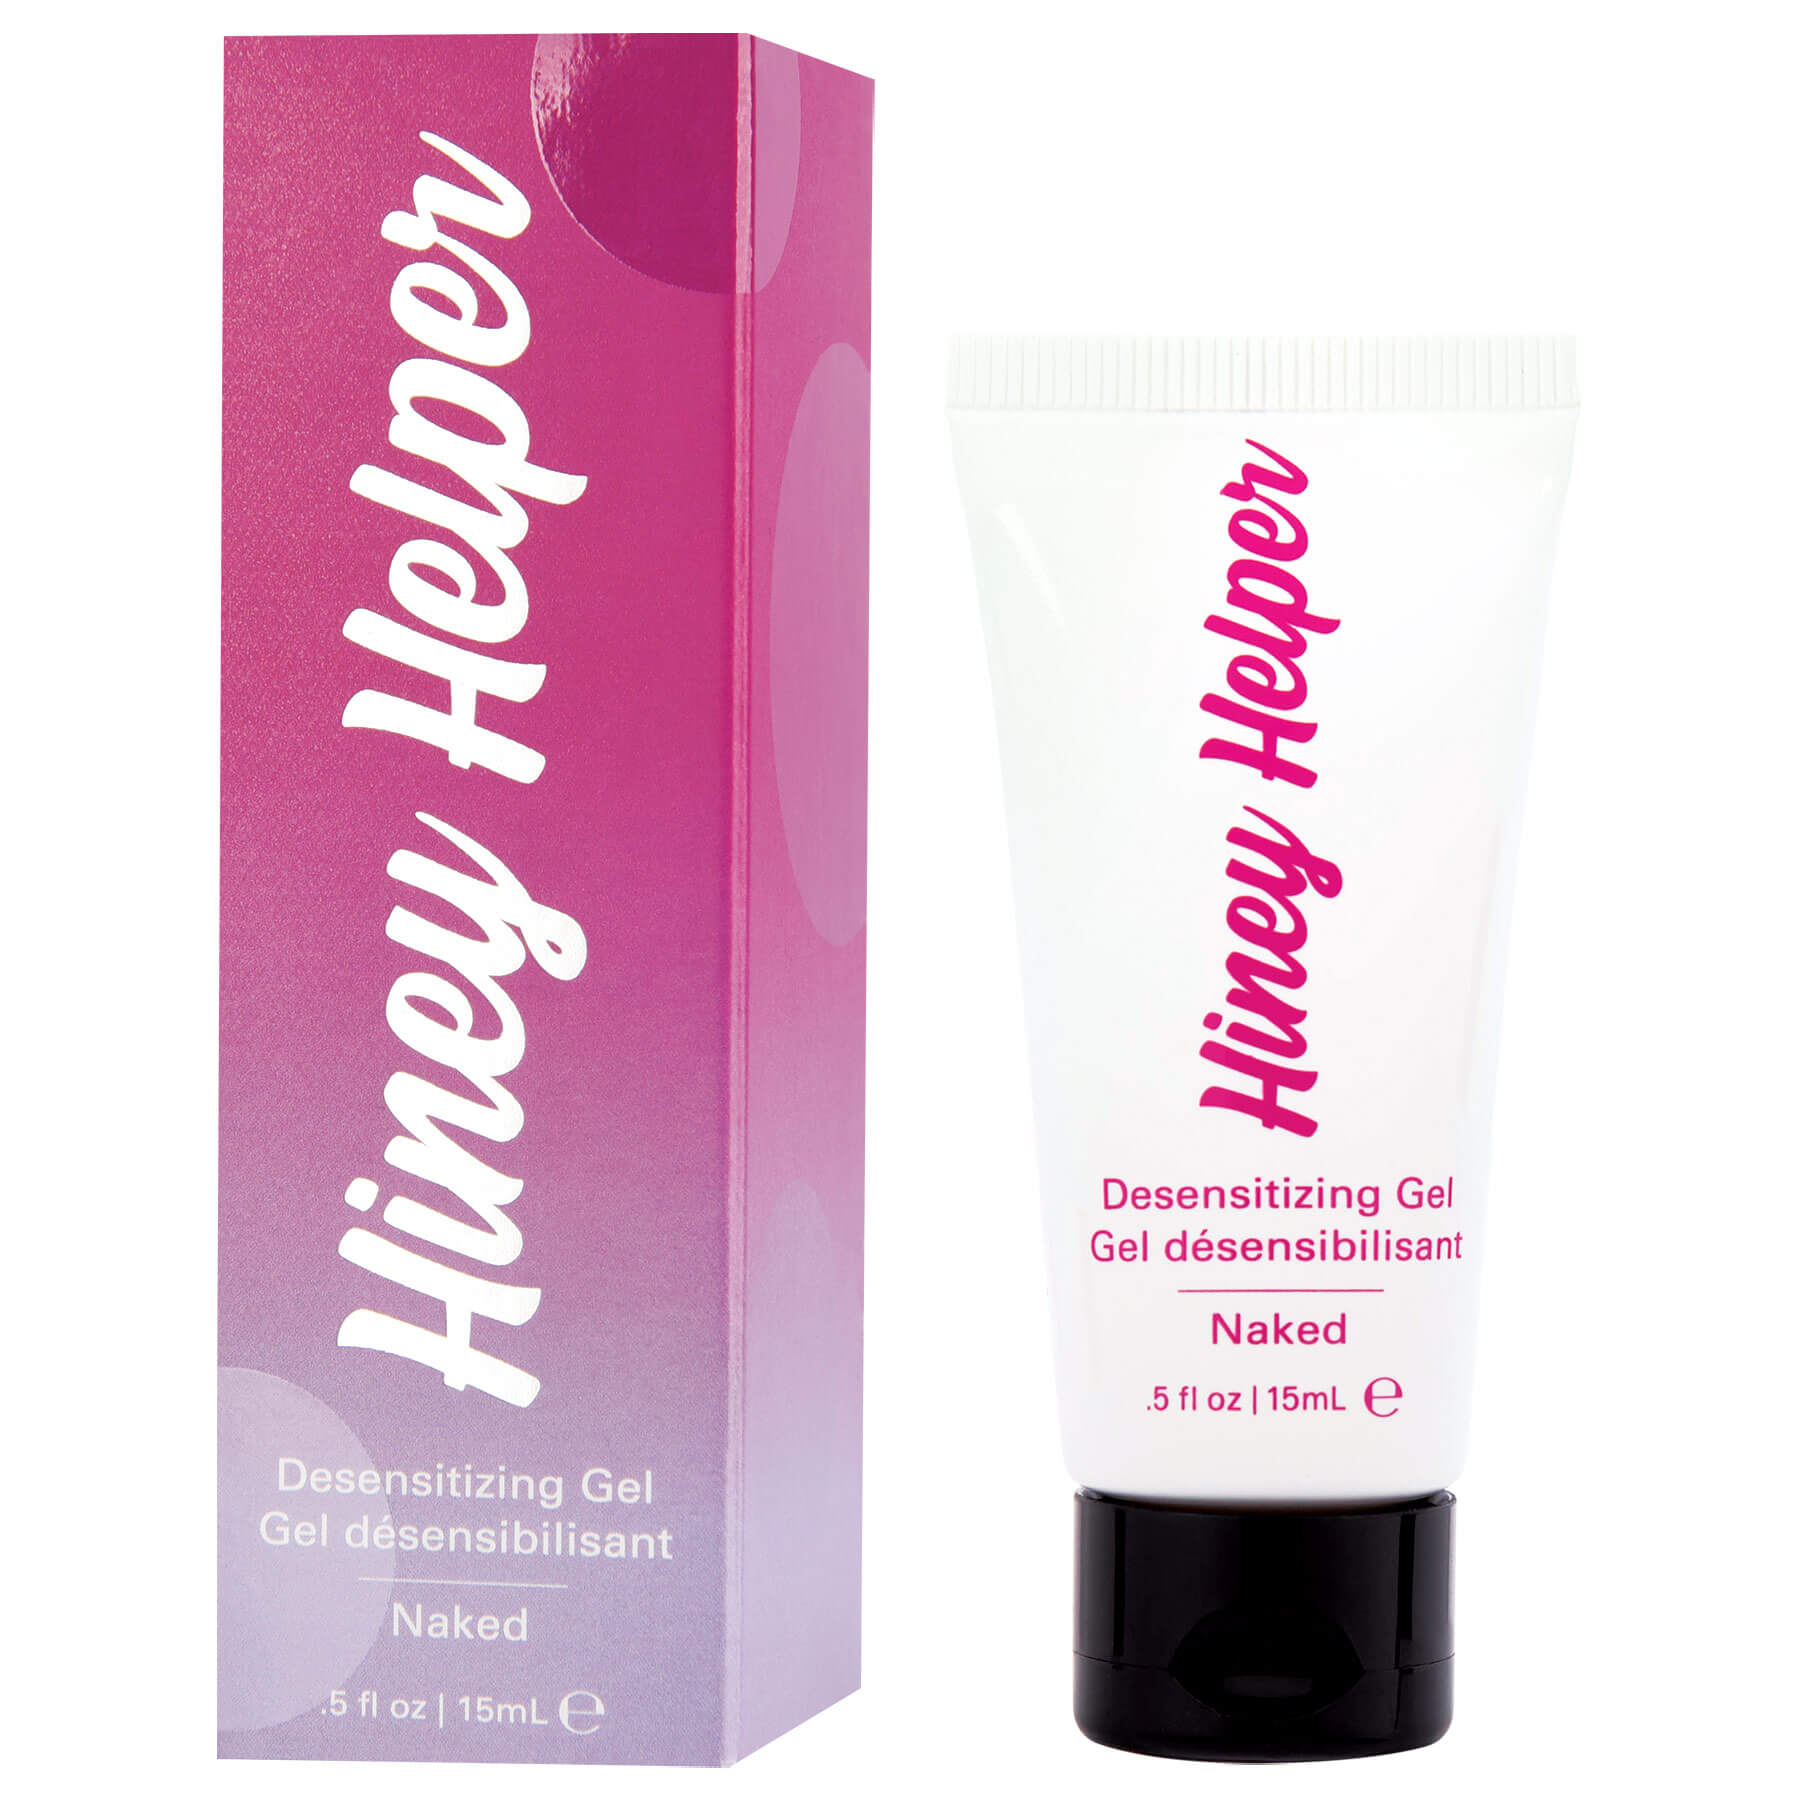 Jelique Hiney Helper Anal Calm Balm - The Bigger O online sex toy shop USA, Canada & UK shipping available